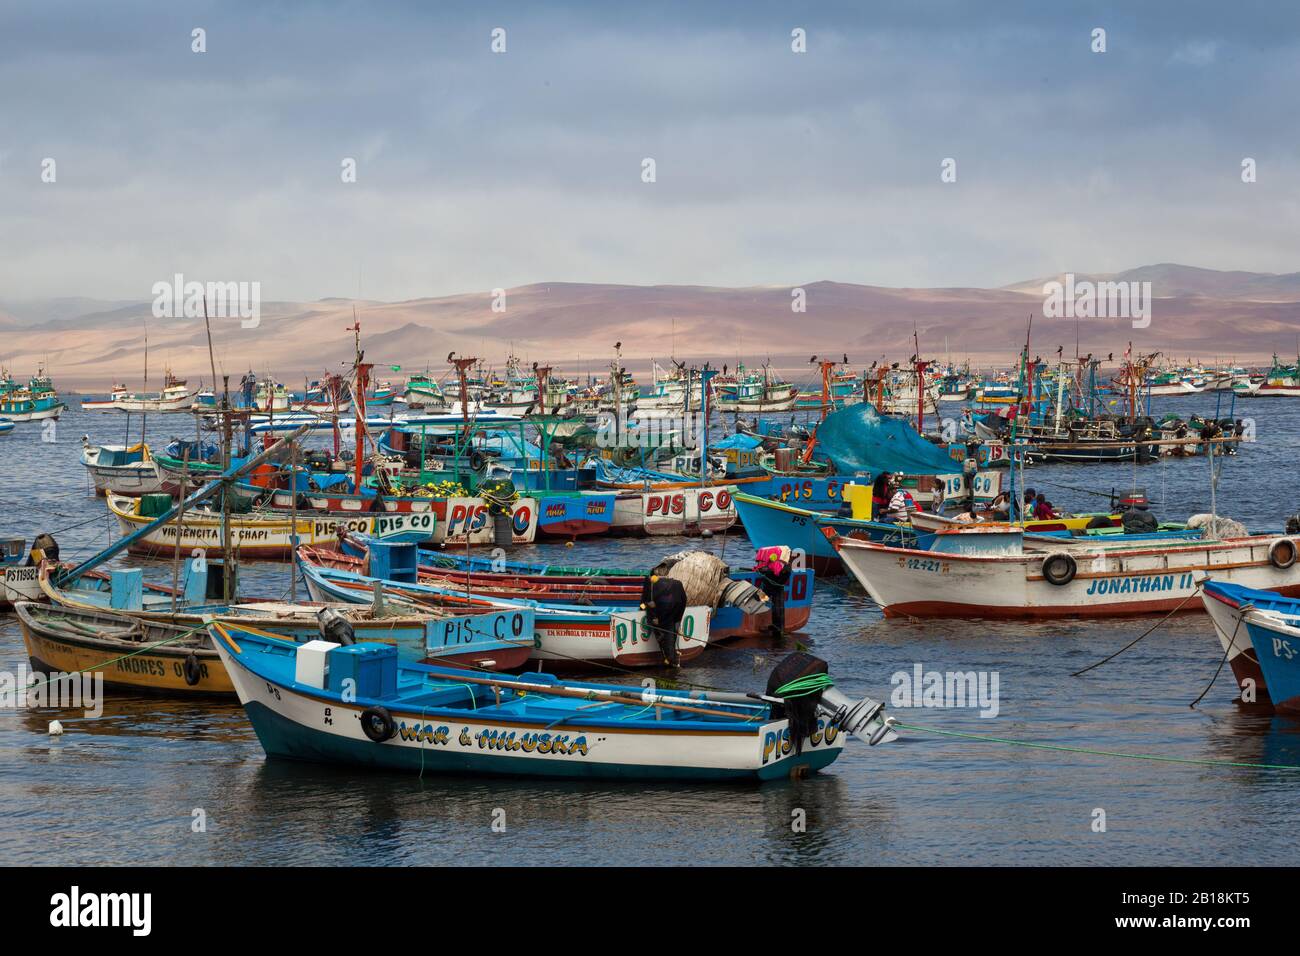 A large number of local fishing vessels moor just off the shore in Paracas, highlighting the juxtaposition of the desert in the background. Stock Photo